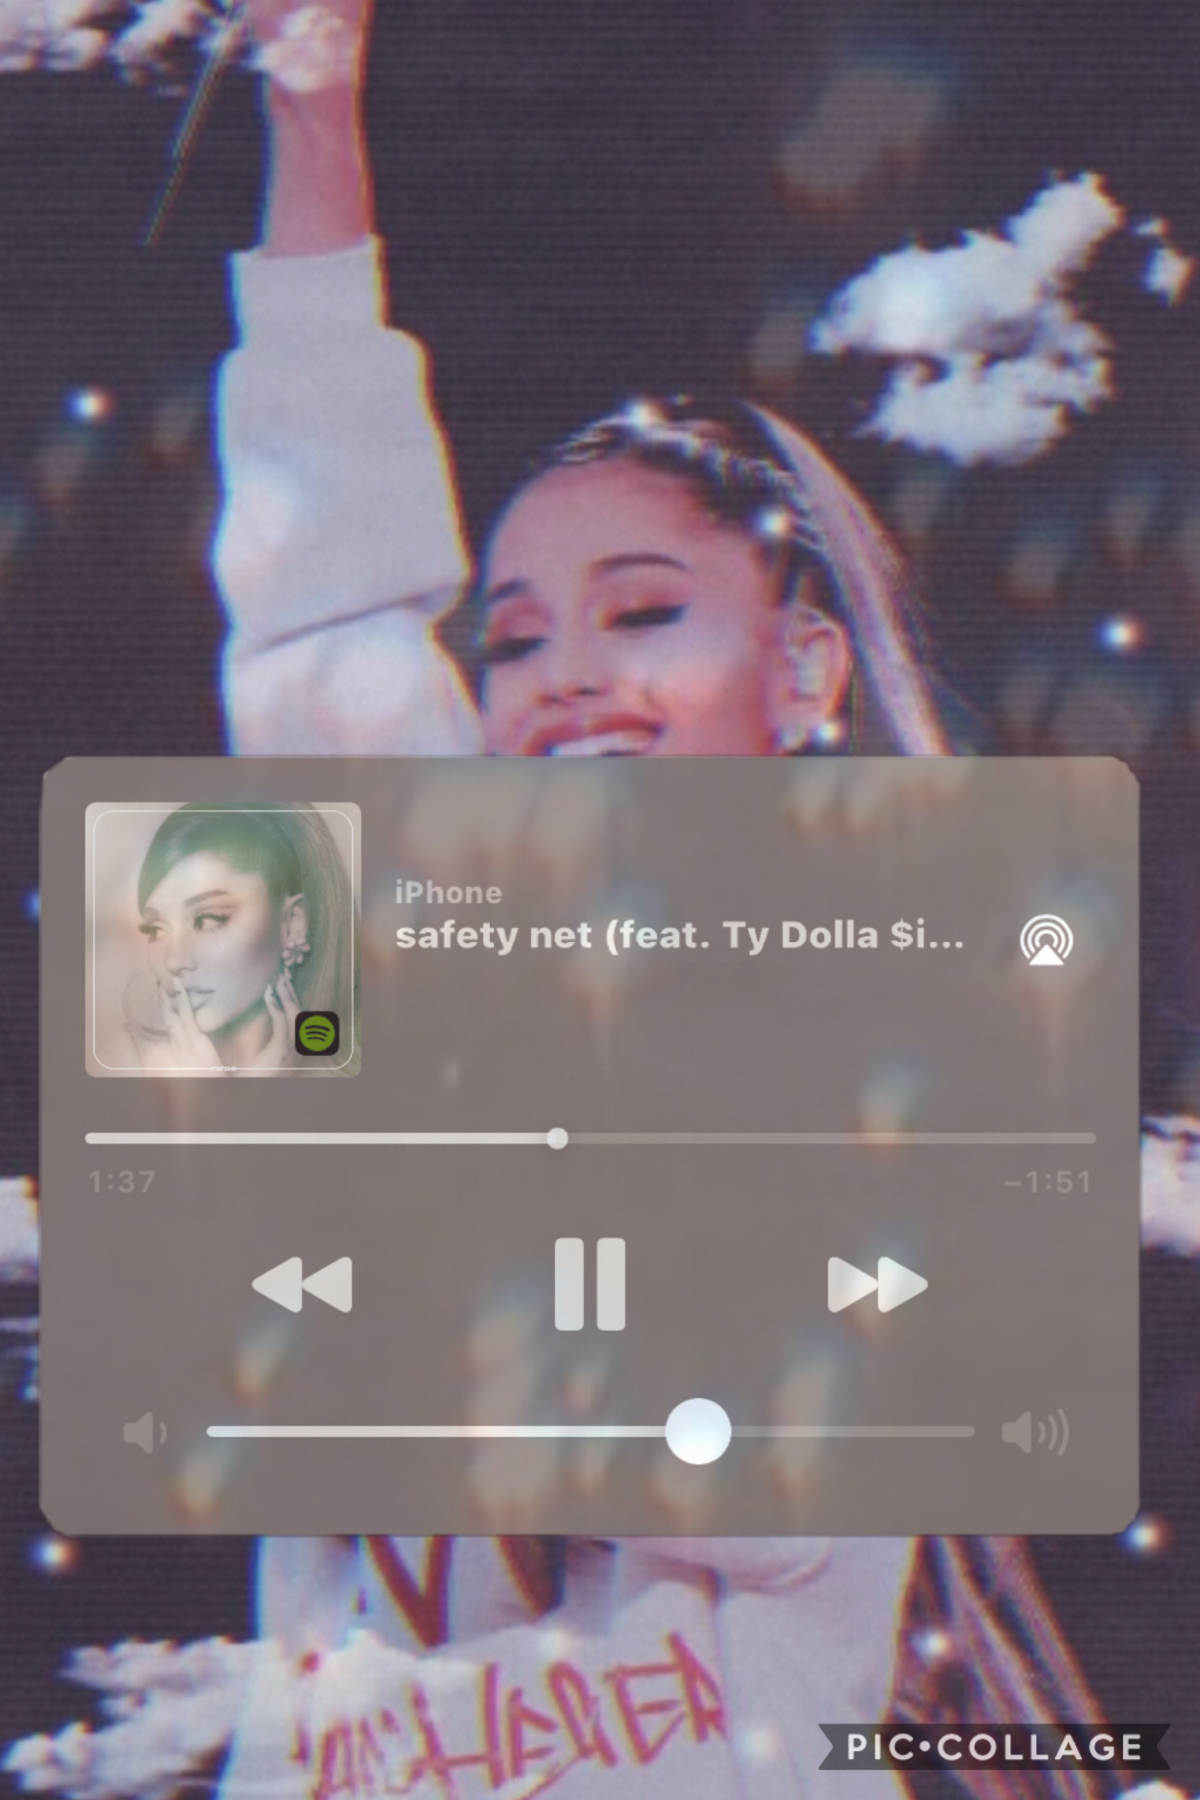 What’s your favorite Ariana’s song, mine is 34+35 😌🤚🏻
☁️🤍✨